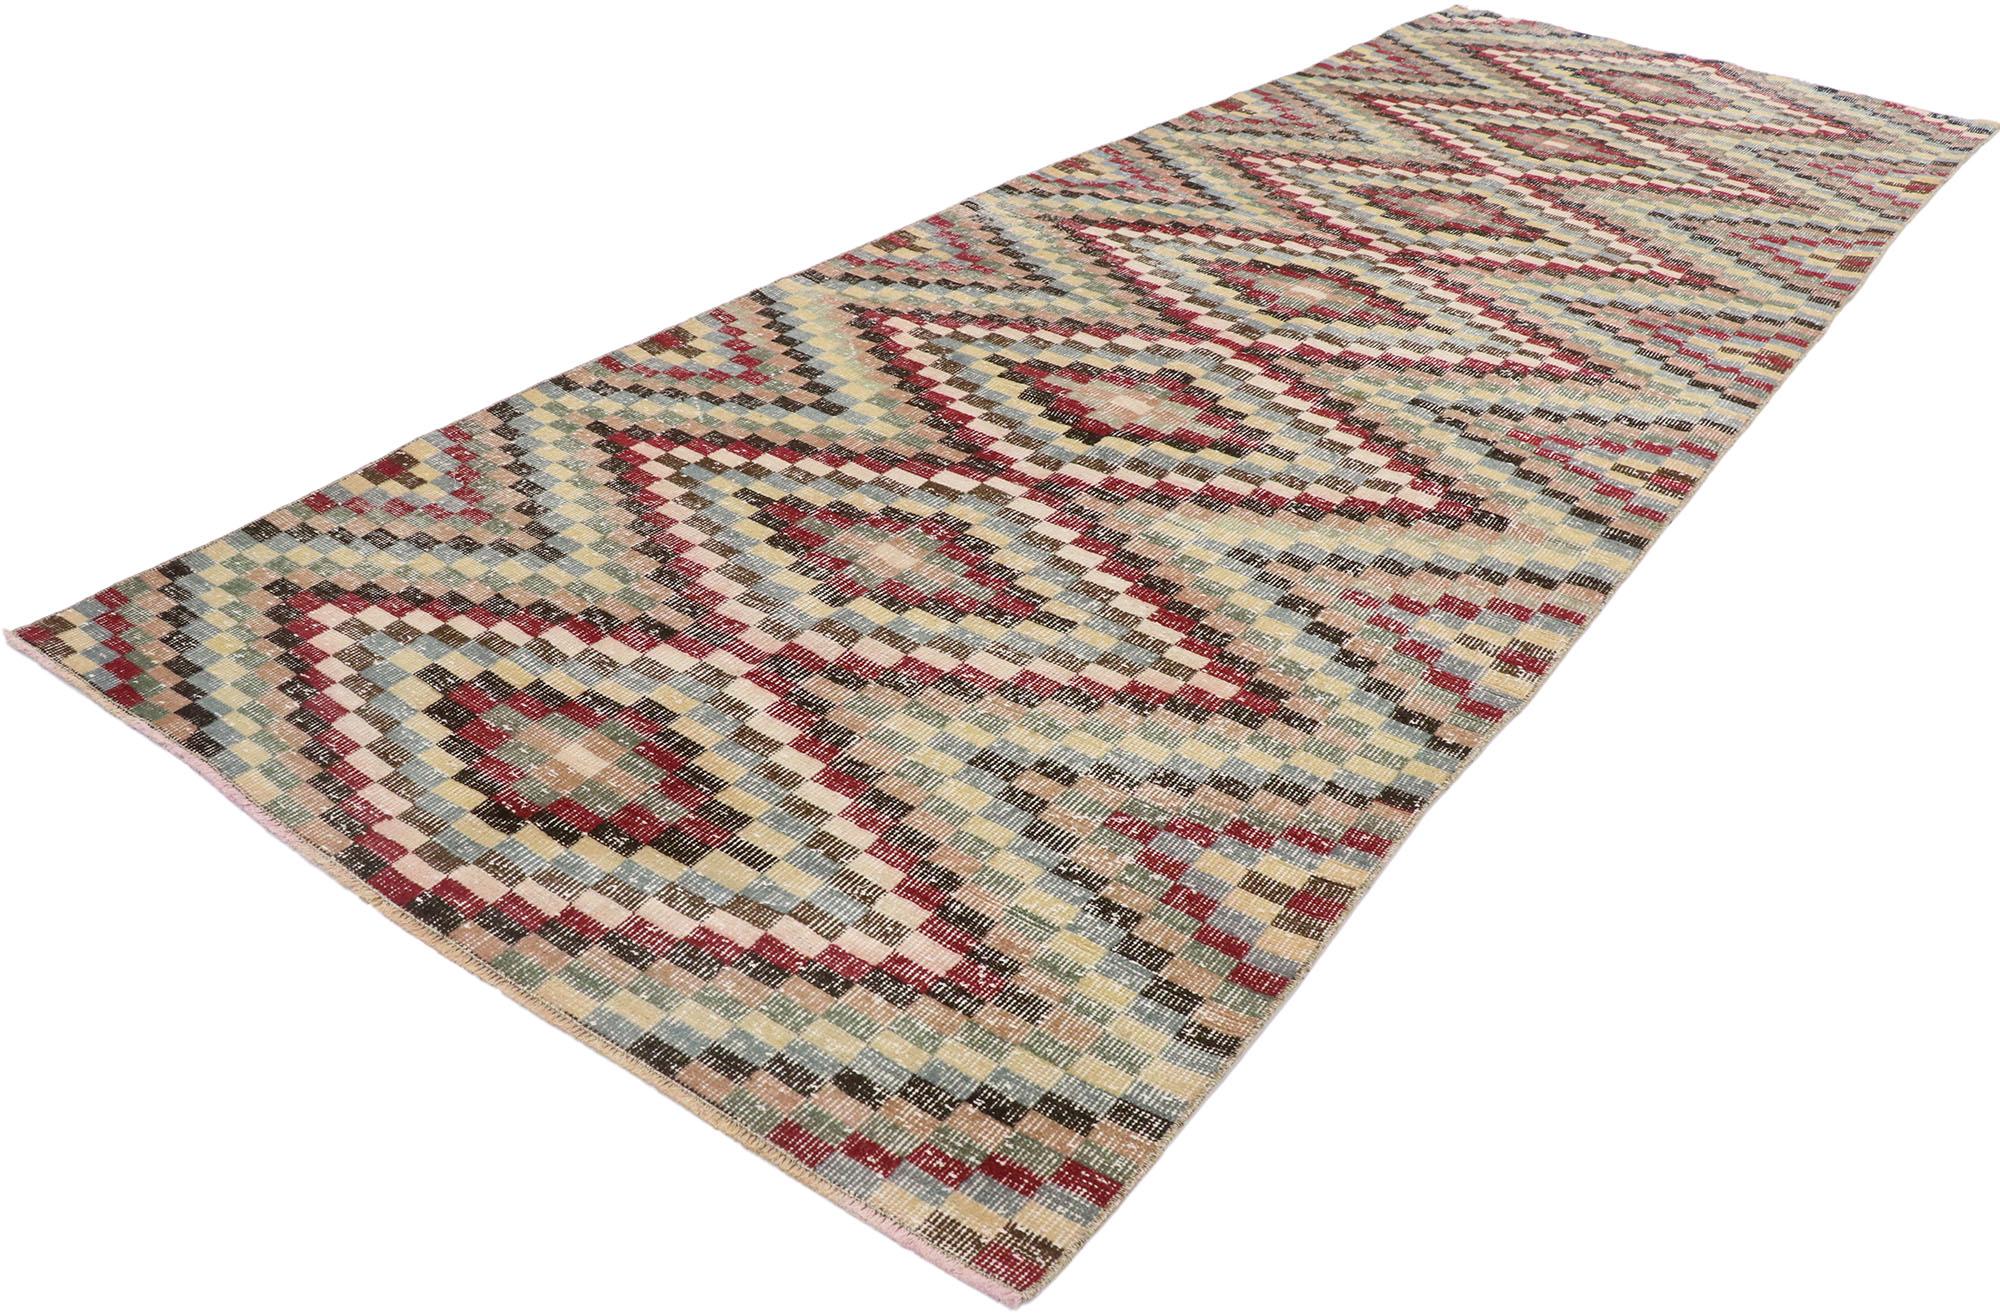 53367, distressed vintage Turkish Sivas rug with Modern Rustic Cubism style. This hand knotted wool distressed vintage Turkish Sivas runner features an all-over checkered stacked diamond pattern comprised of rows of multicolored cubes. Each row of